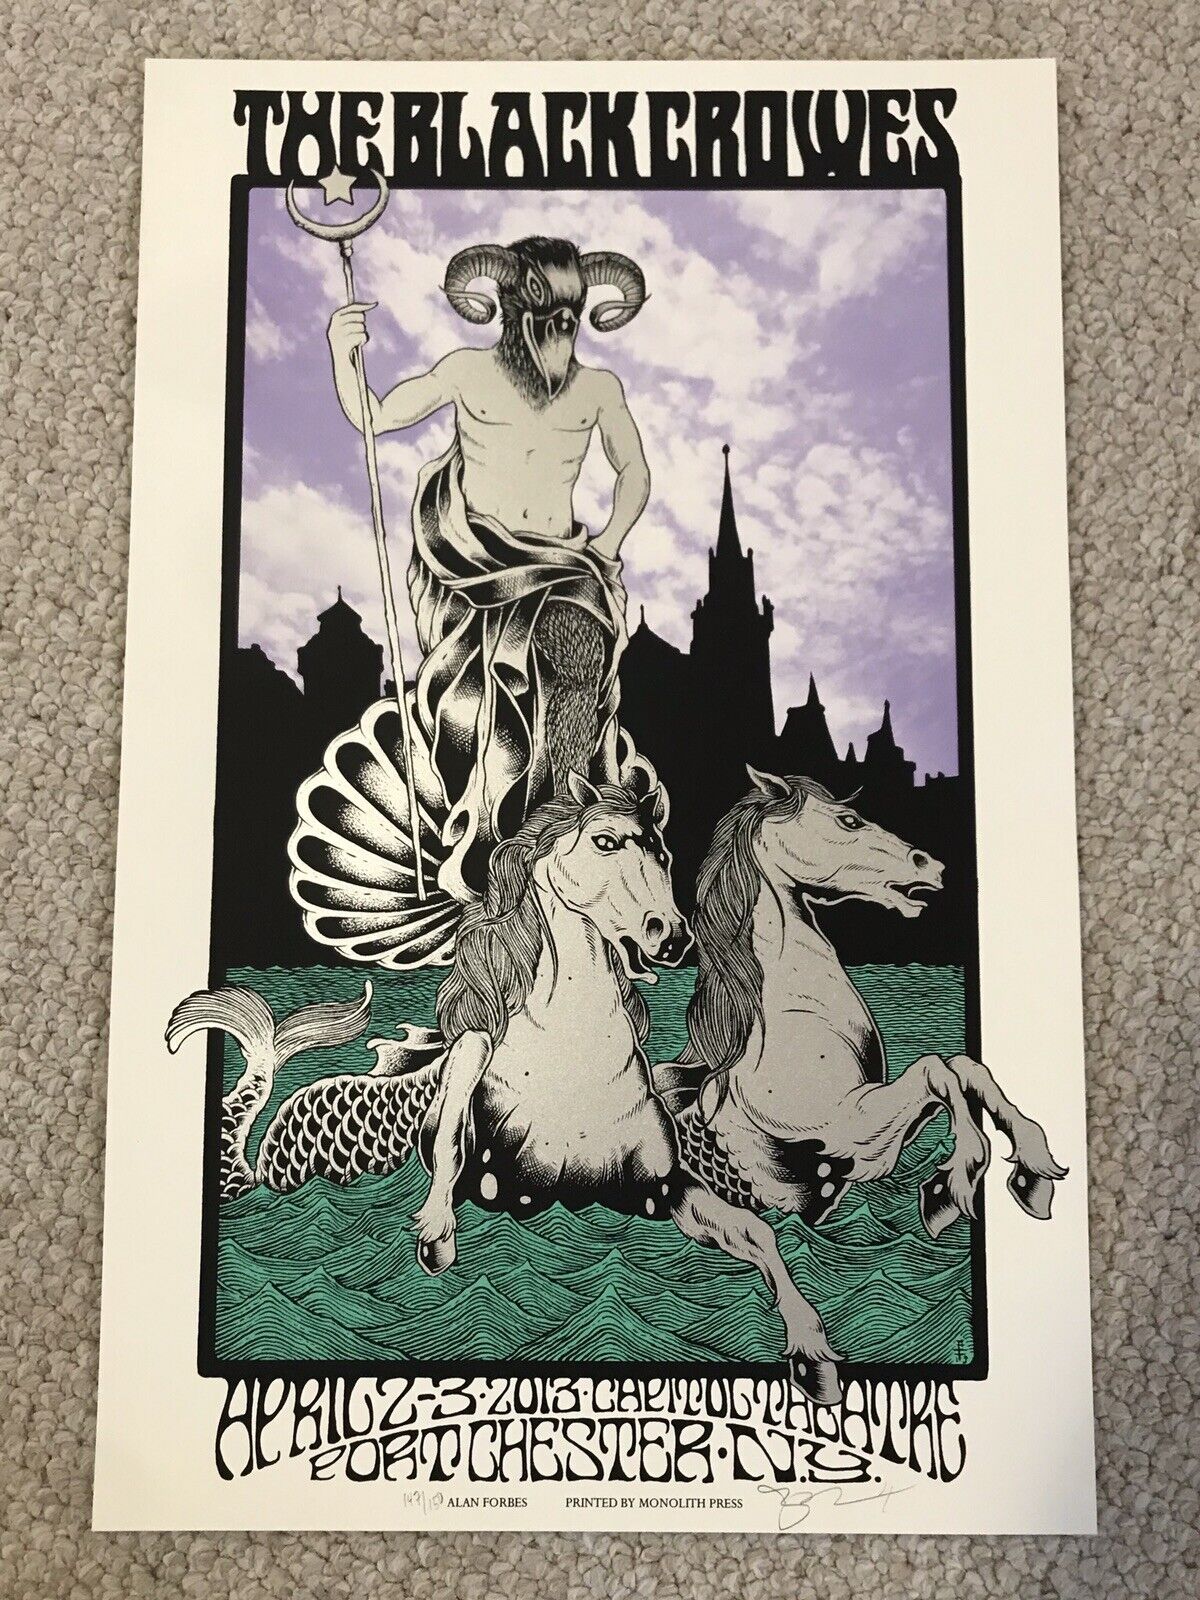 Black Crowes April 2013 Port Chester Ny Poster 147/150